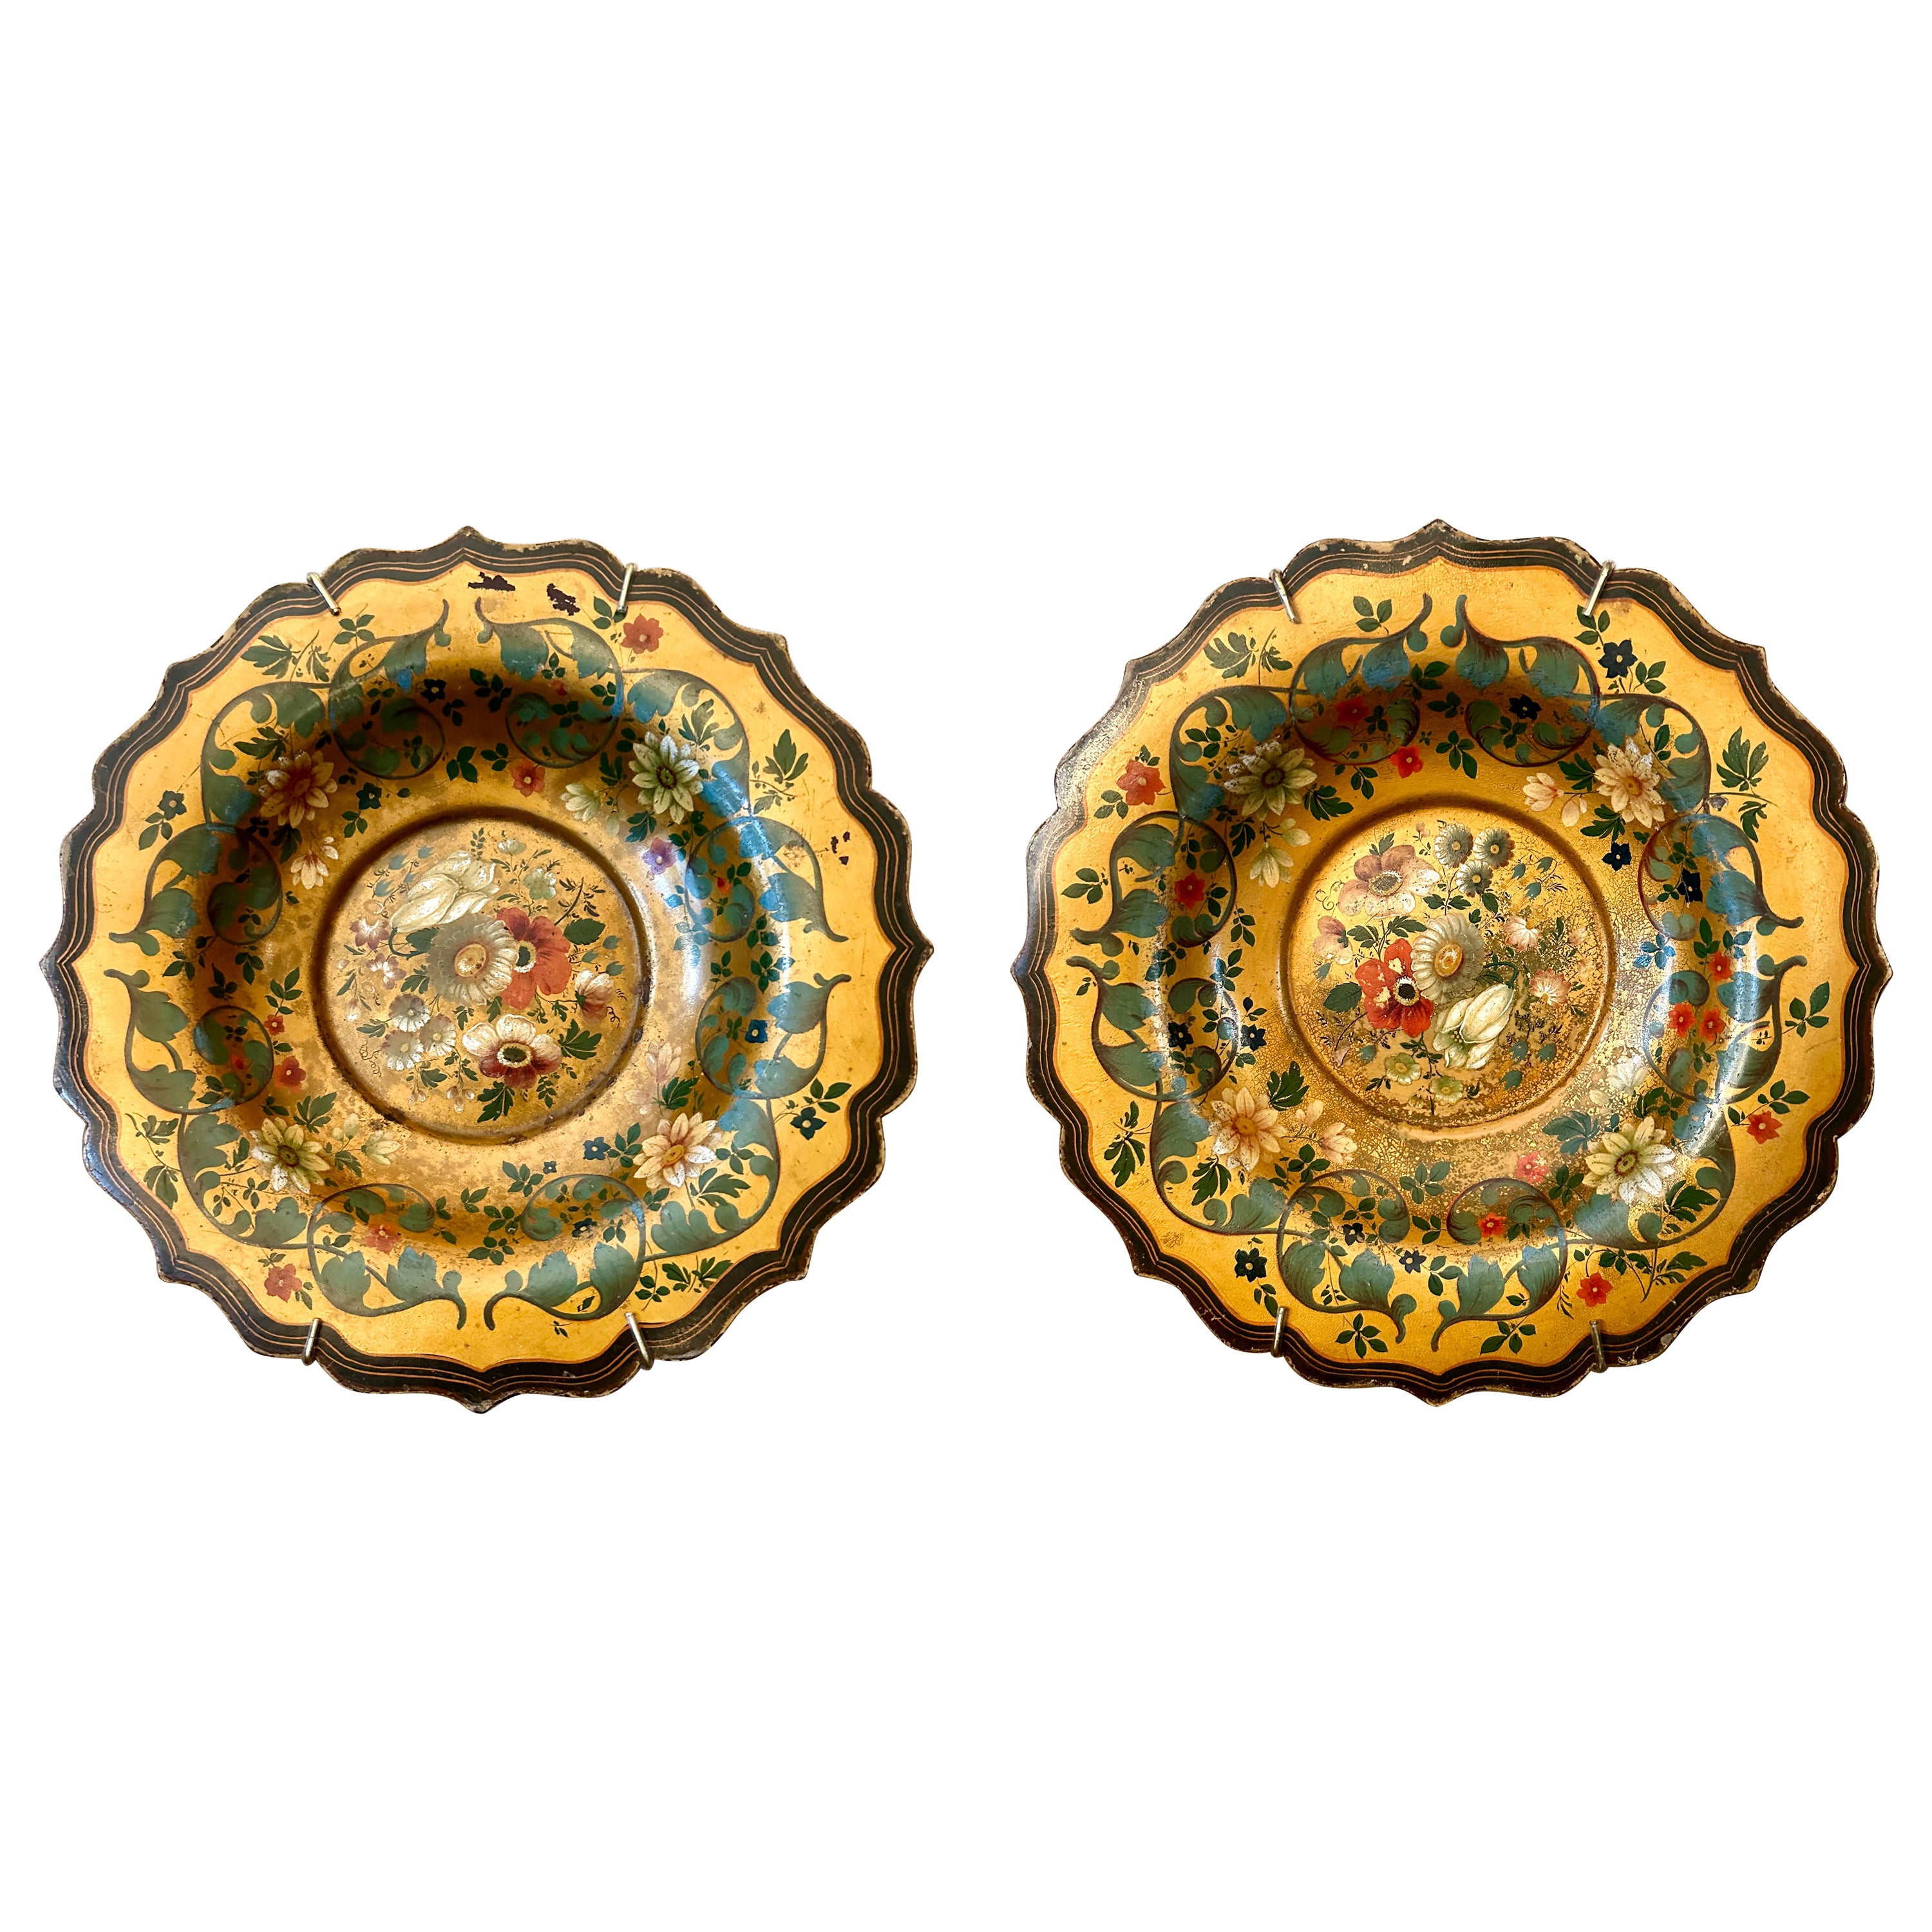 Pair Antique 19th Century French Hand-Painted Tole Wall Plates, Circa 1890's.